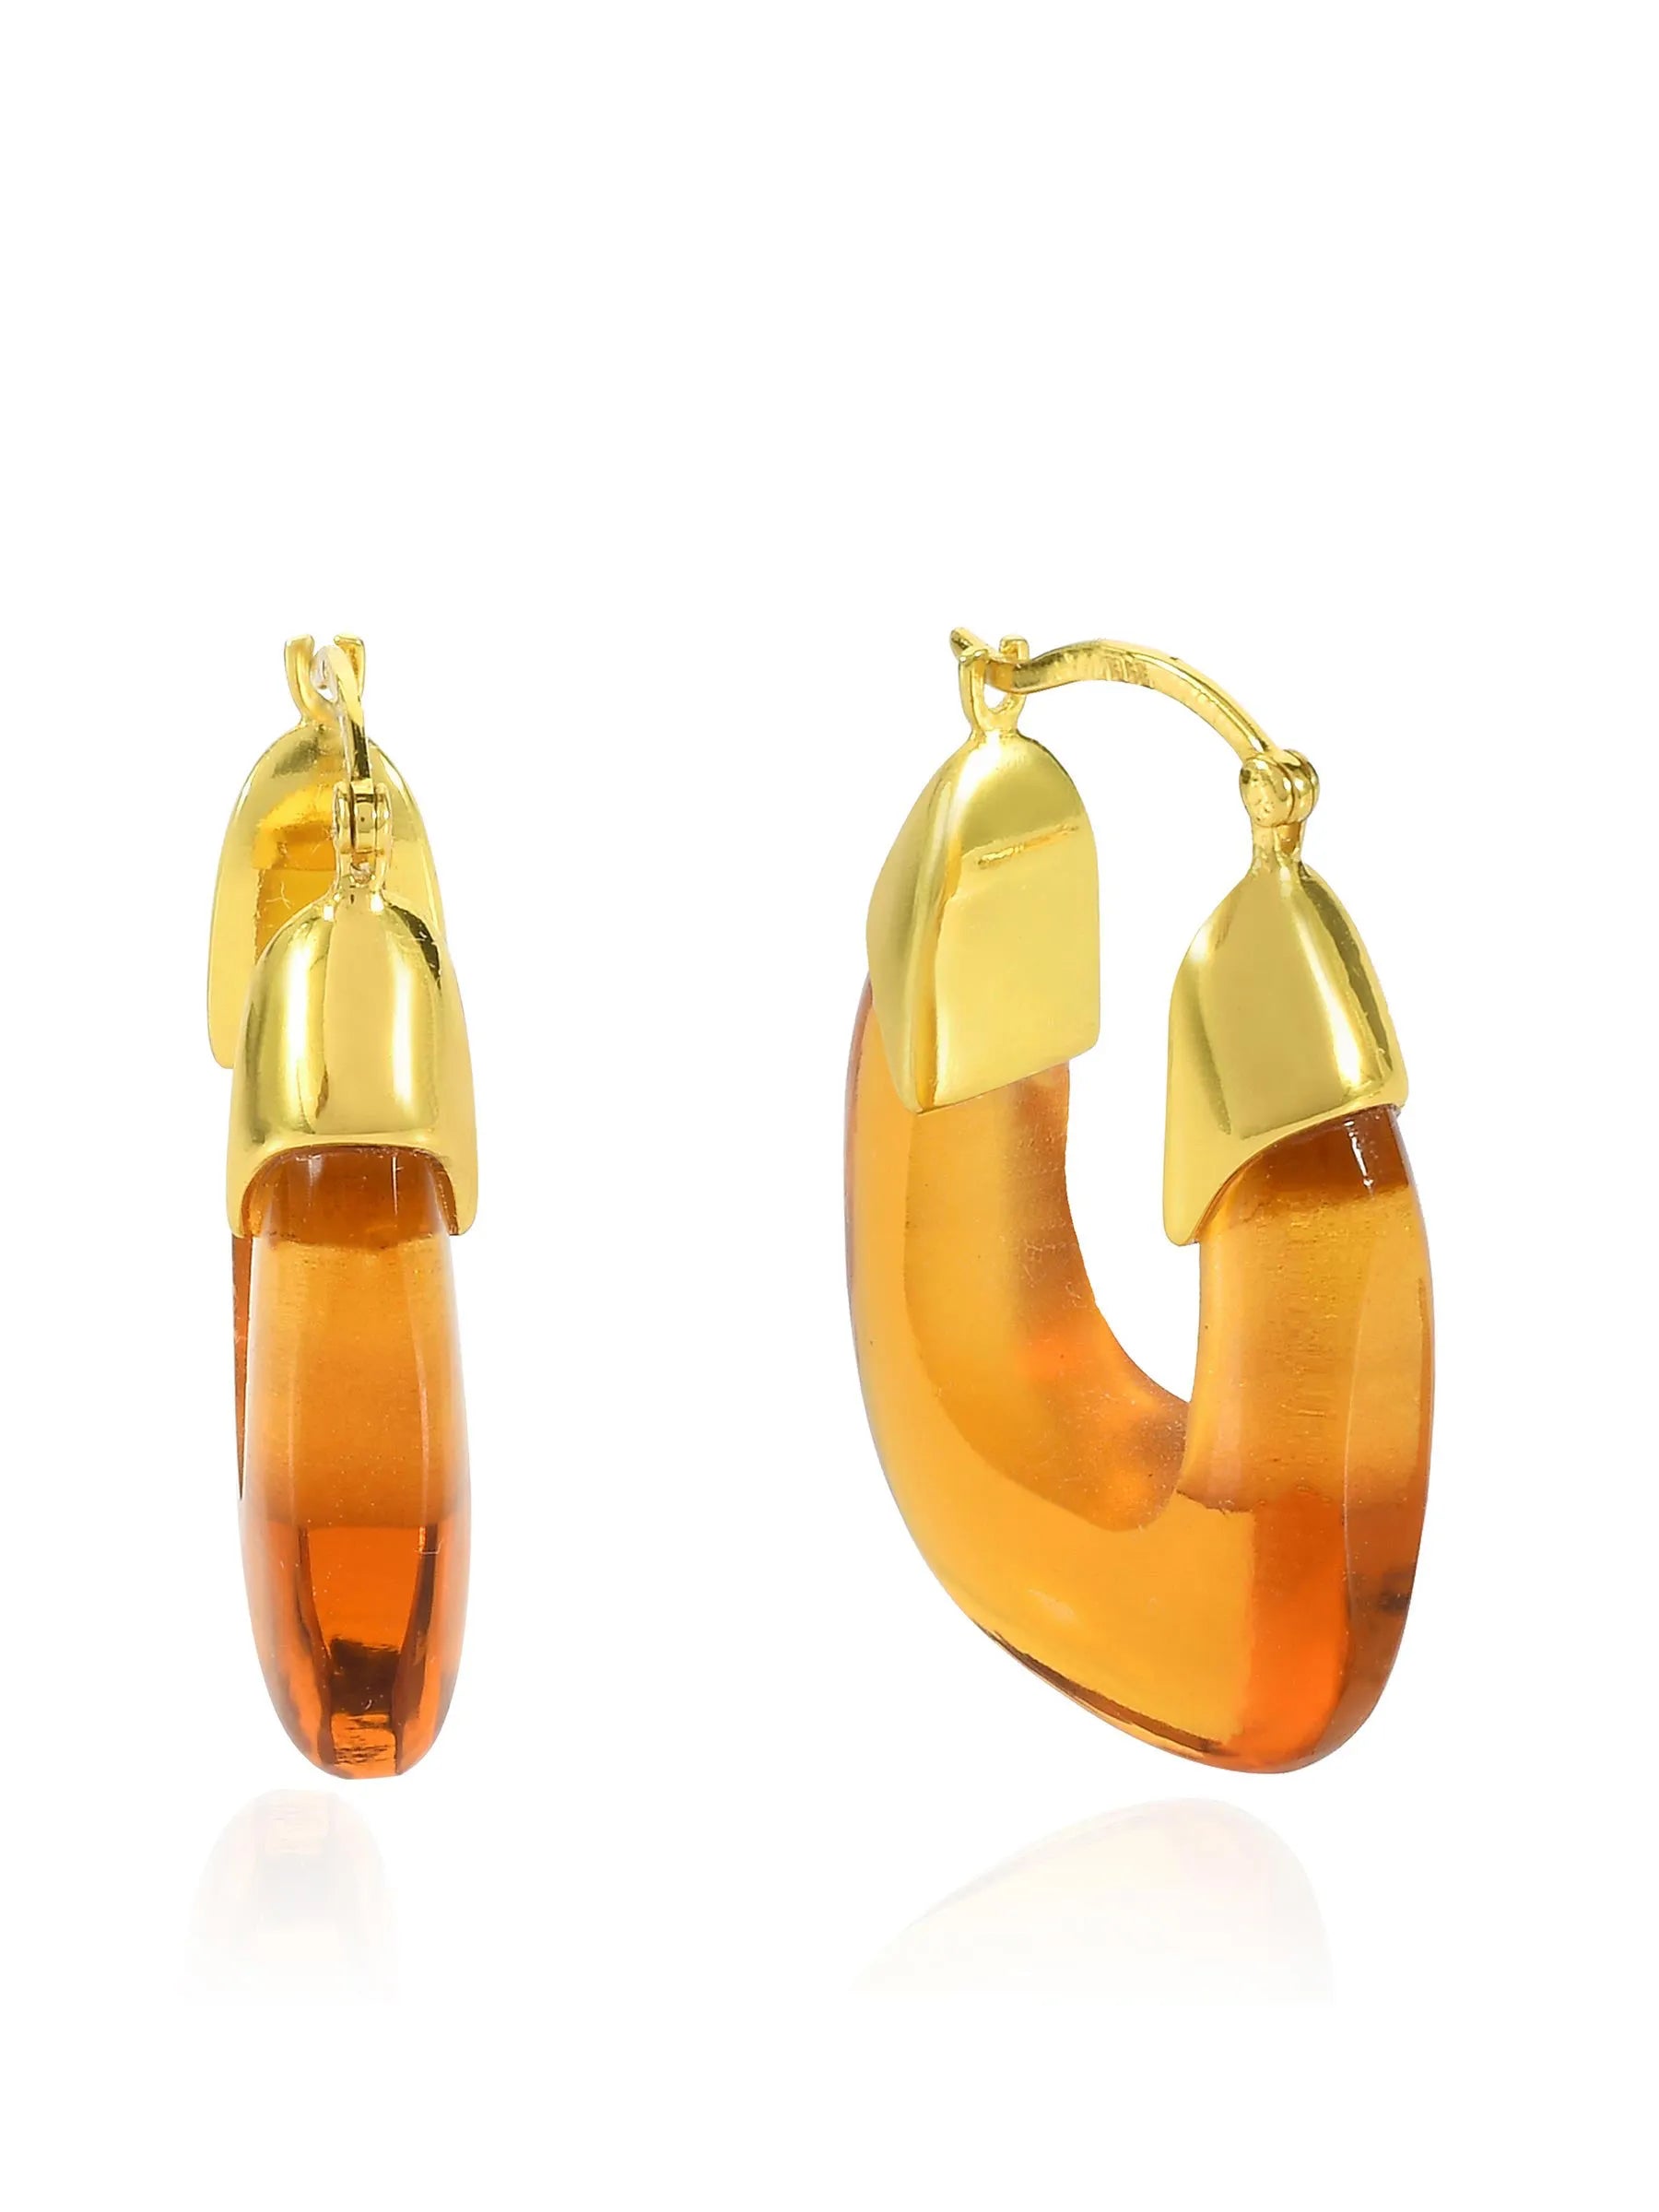 A pair of Shyla Rafelli earrings - gold with citrine glass.